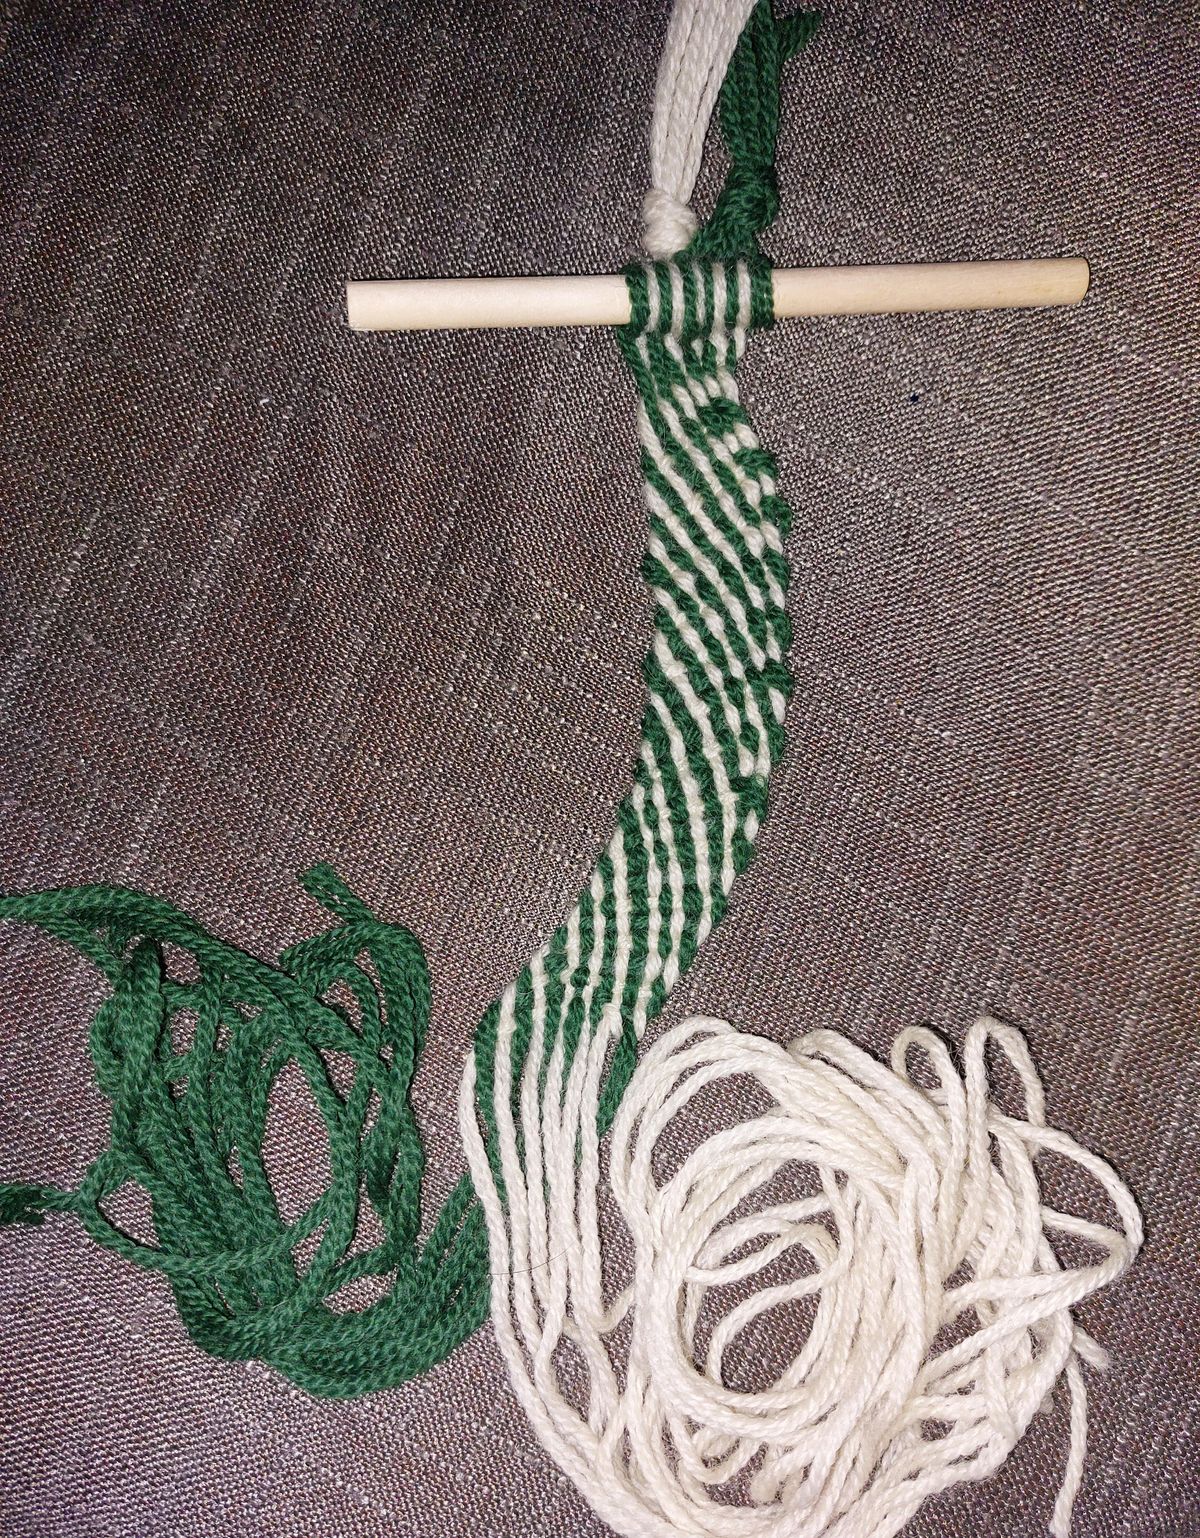 Intro to Finger Weaving